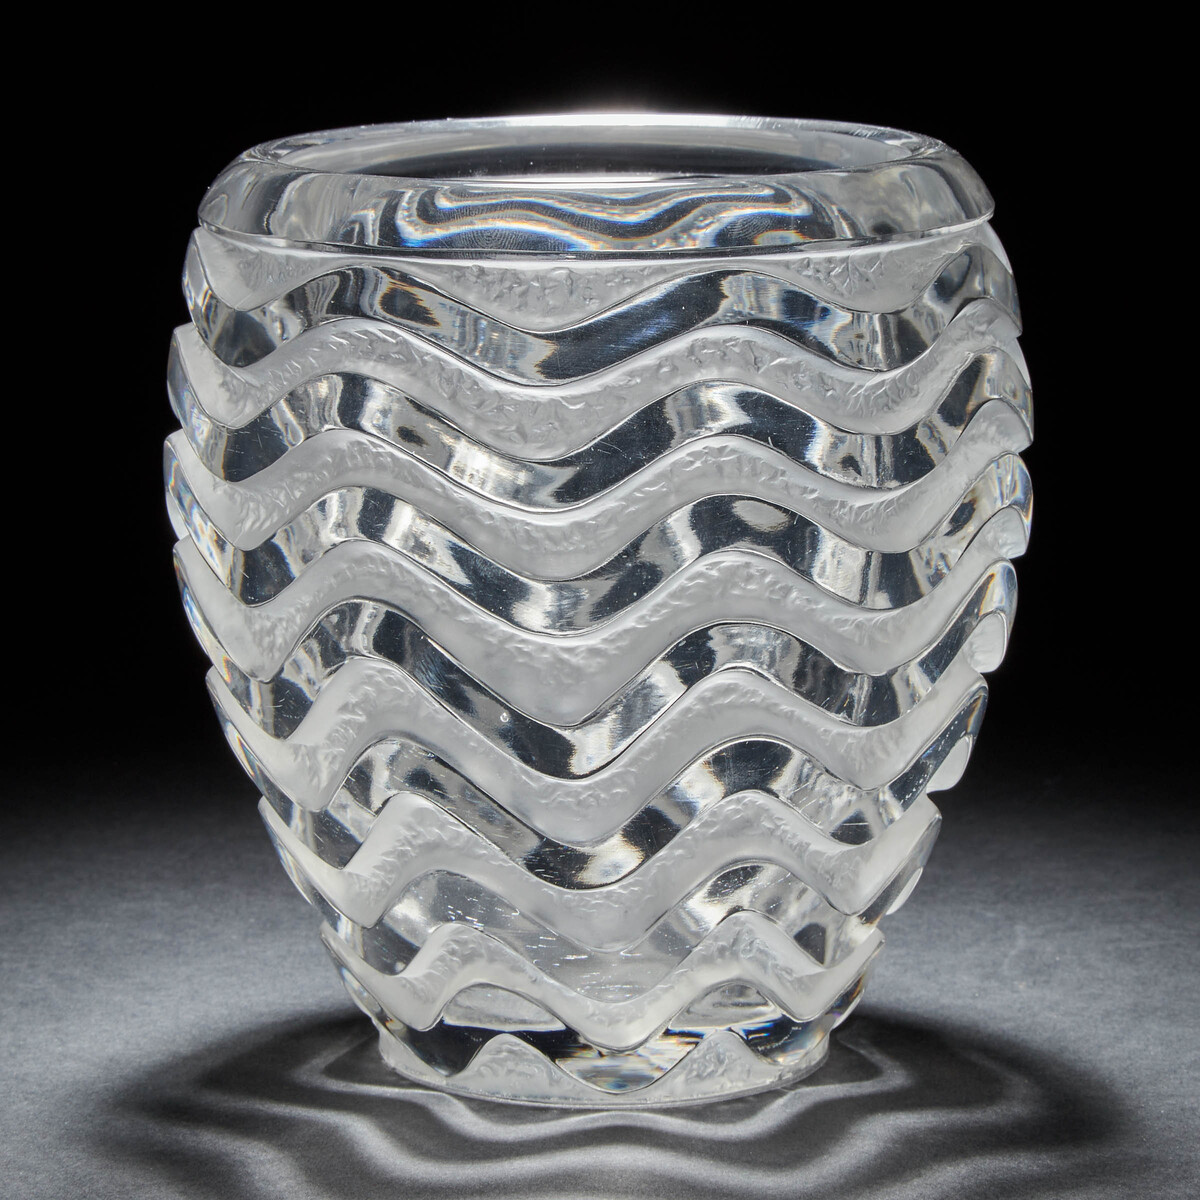 'Méandres', Lalique Moulded and Partly Frosted Glass Vase, post-1945, height 6.3 in — 16.1 cm